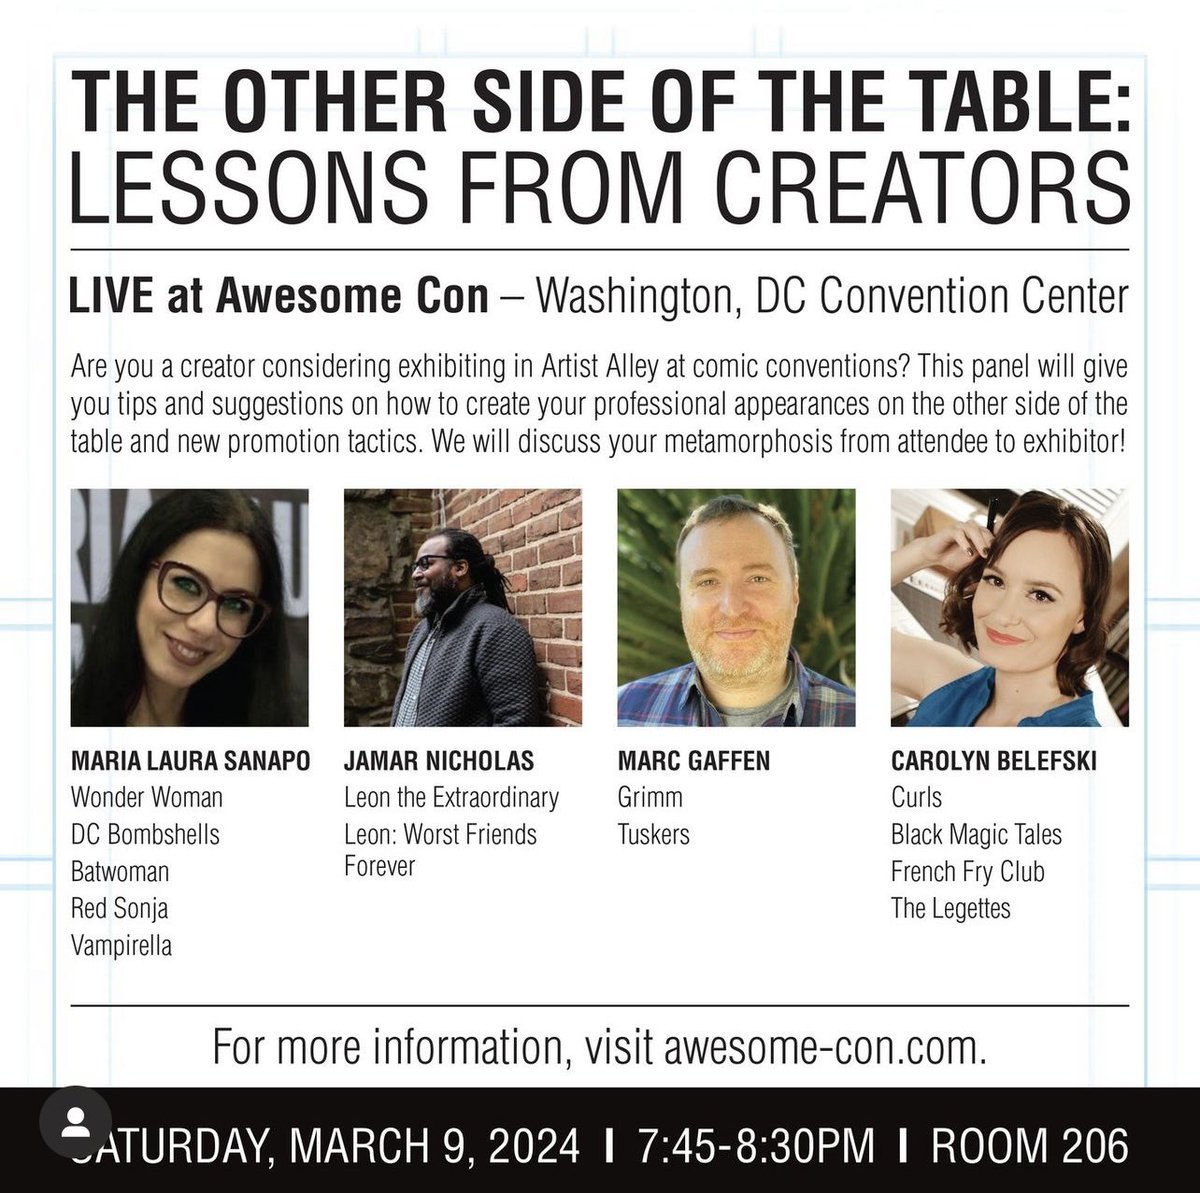 See you at tomorrow’s panel “The Other Side of the Table: Lessons from Creators at Awesome Con 2024 at 7:45PM in Room 206 at the DC Convention Center! @AwesomeCon #AwesomeCon #comics #SorinalntoAwesome #TheOtherSideOfTheTable